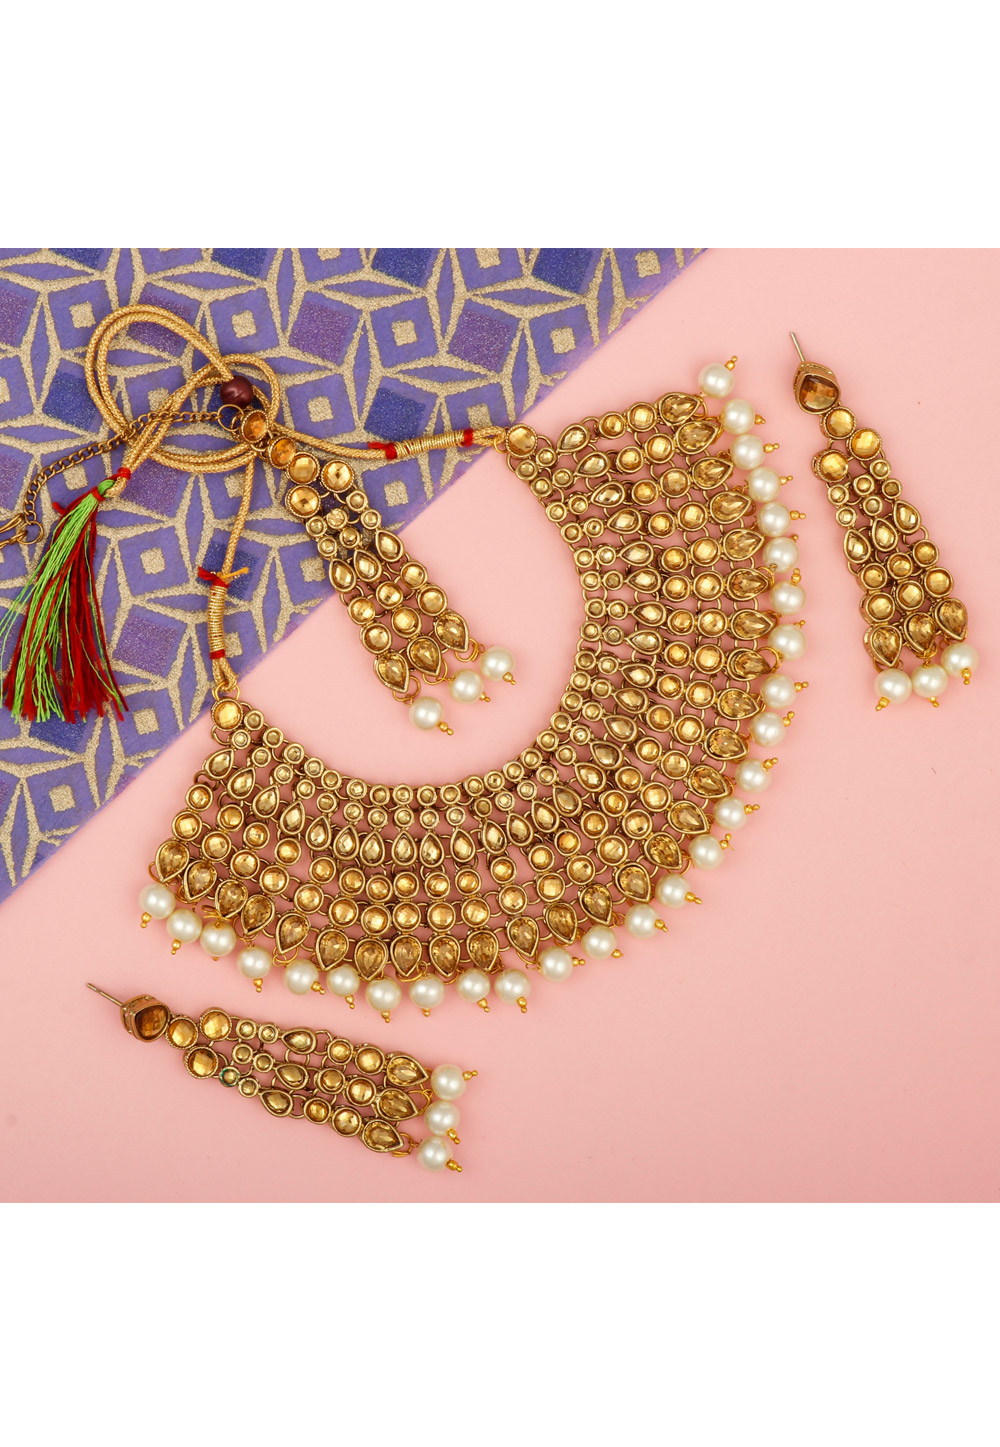 Off White Alloy Necklace Set With Earrings and Maang Tikka 216412